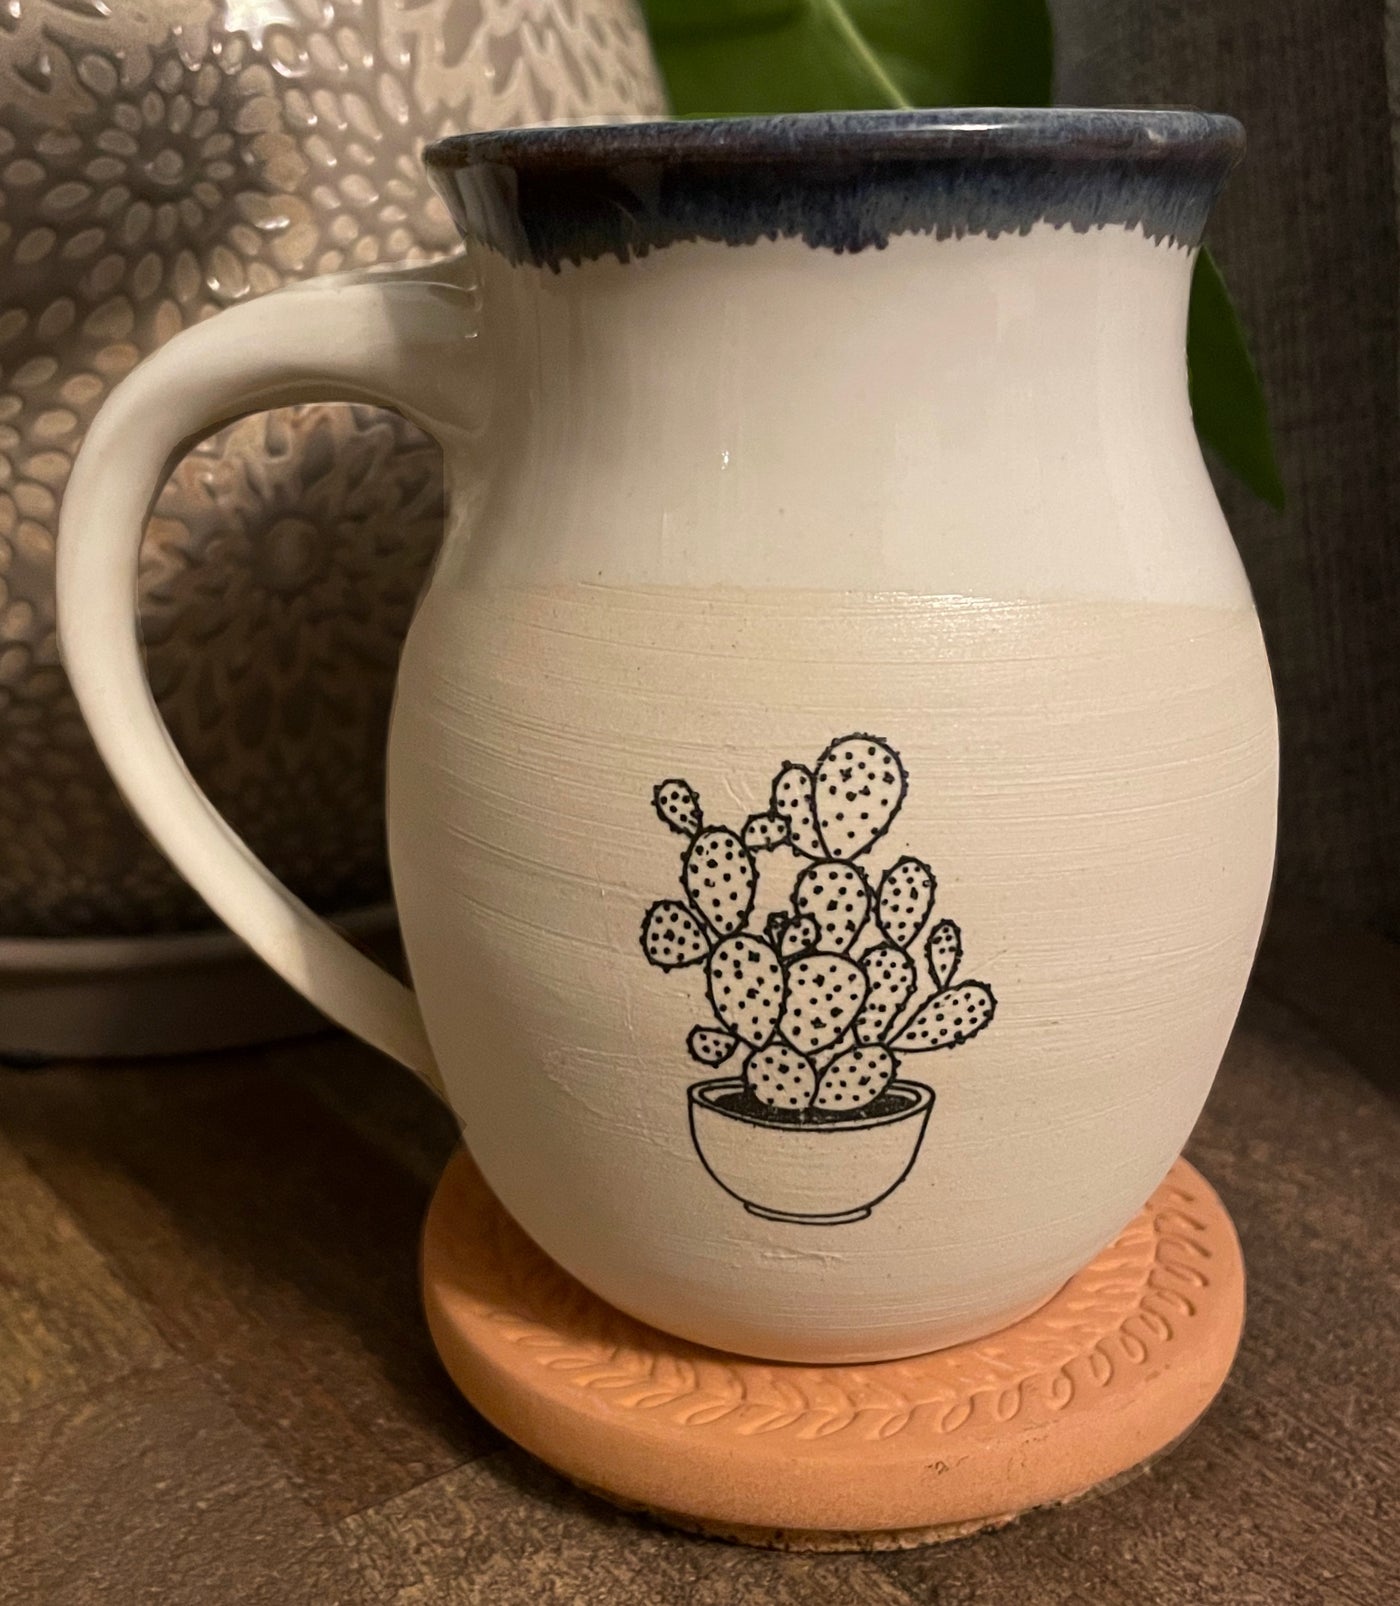 B8 These small batch, handmade mugs are available in blue or green. Each mug is stamped with a unique plant design. Explore the best and coolest gift ideas for plant enthusiasts!